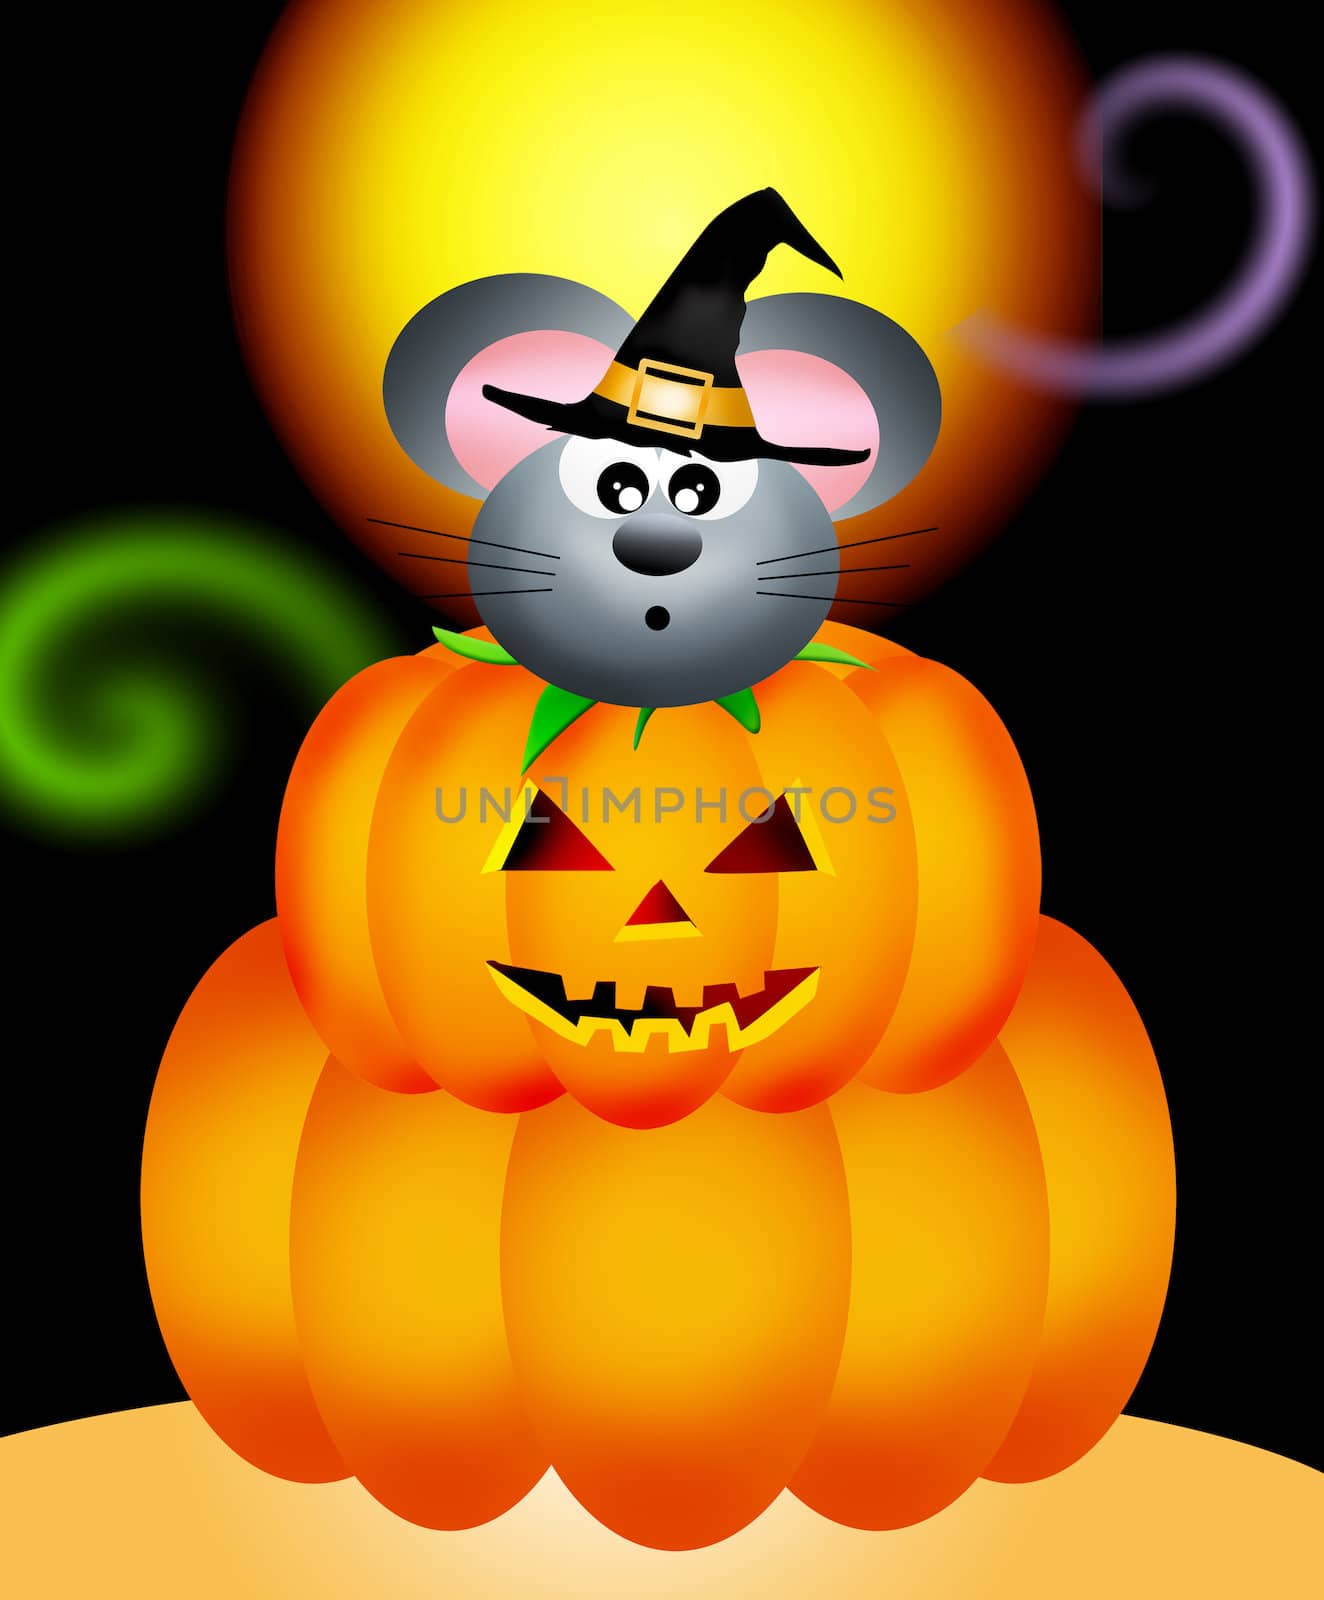 mouse on pumpkin by adrenalina